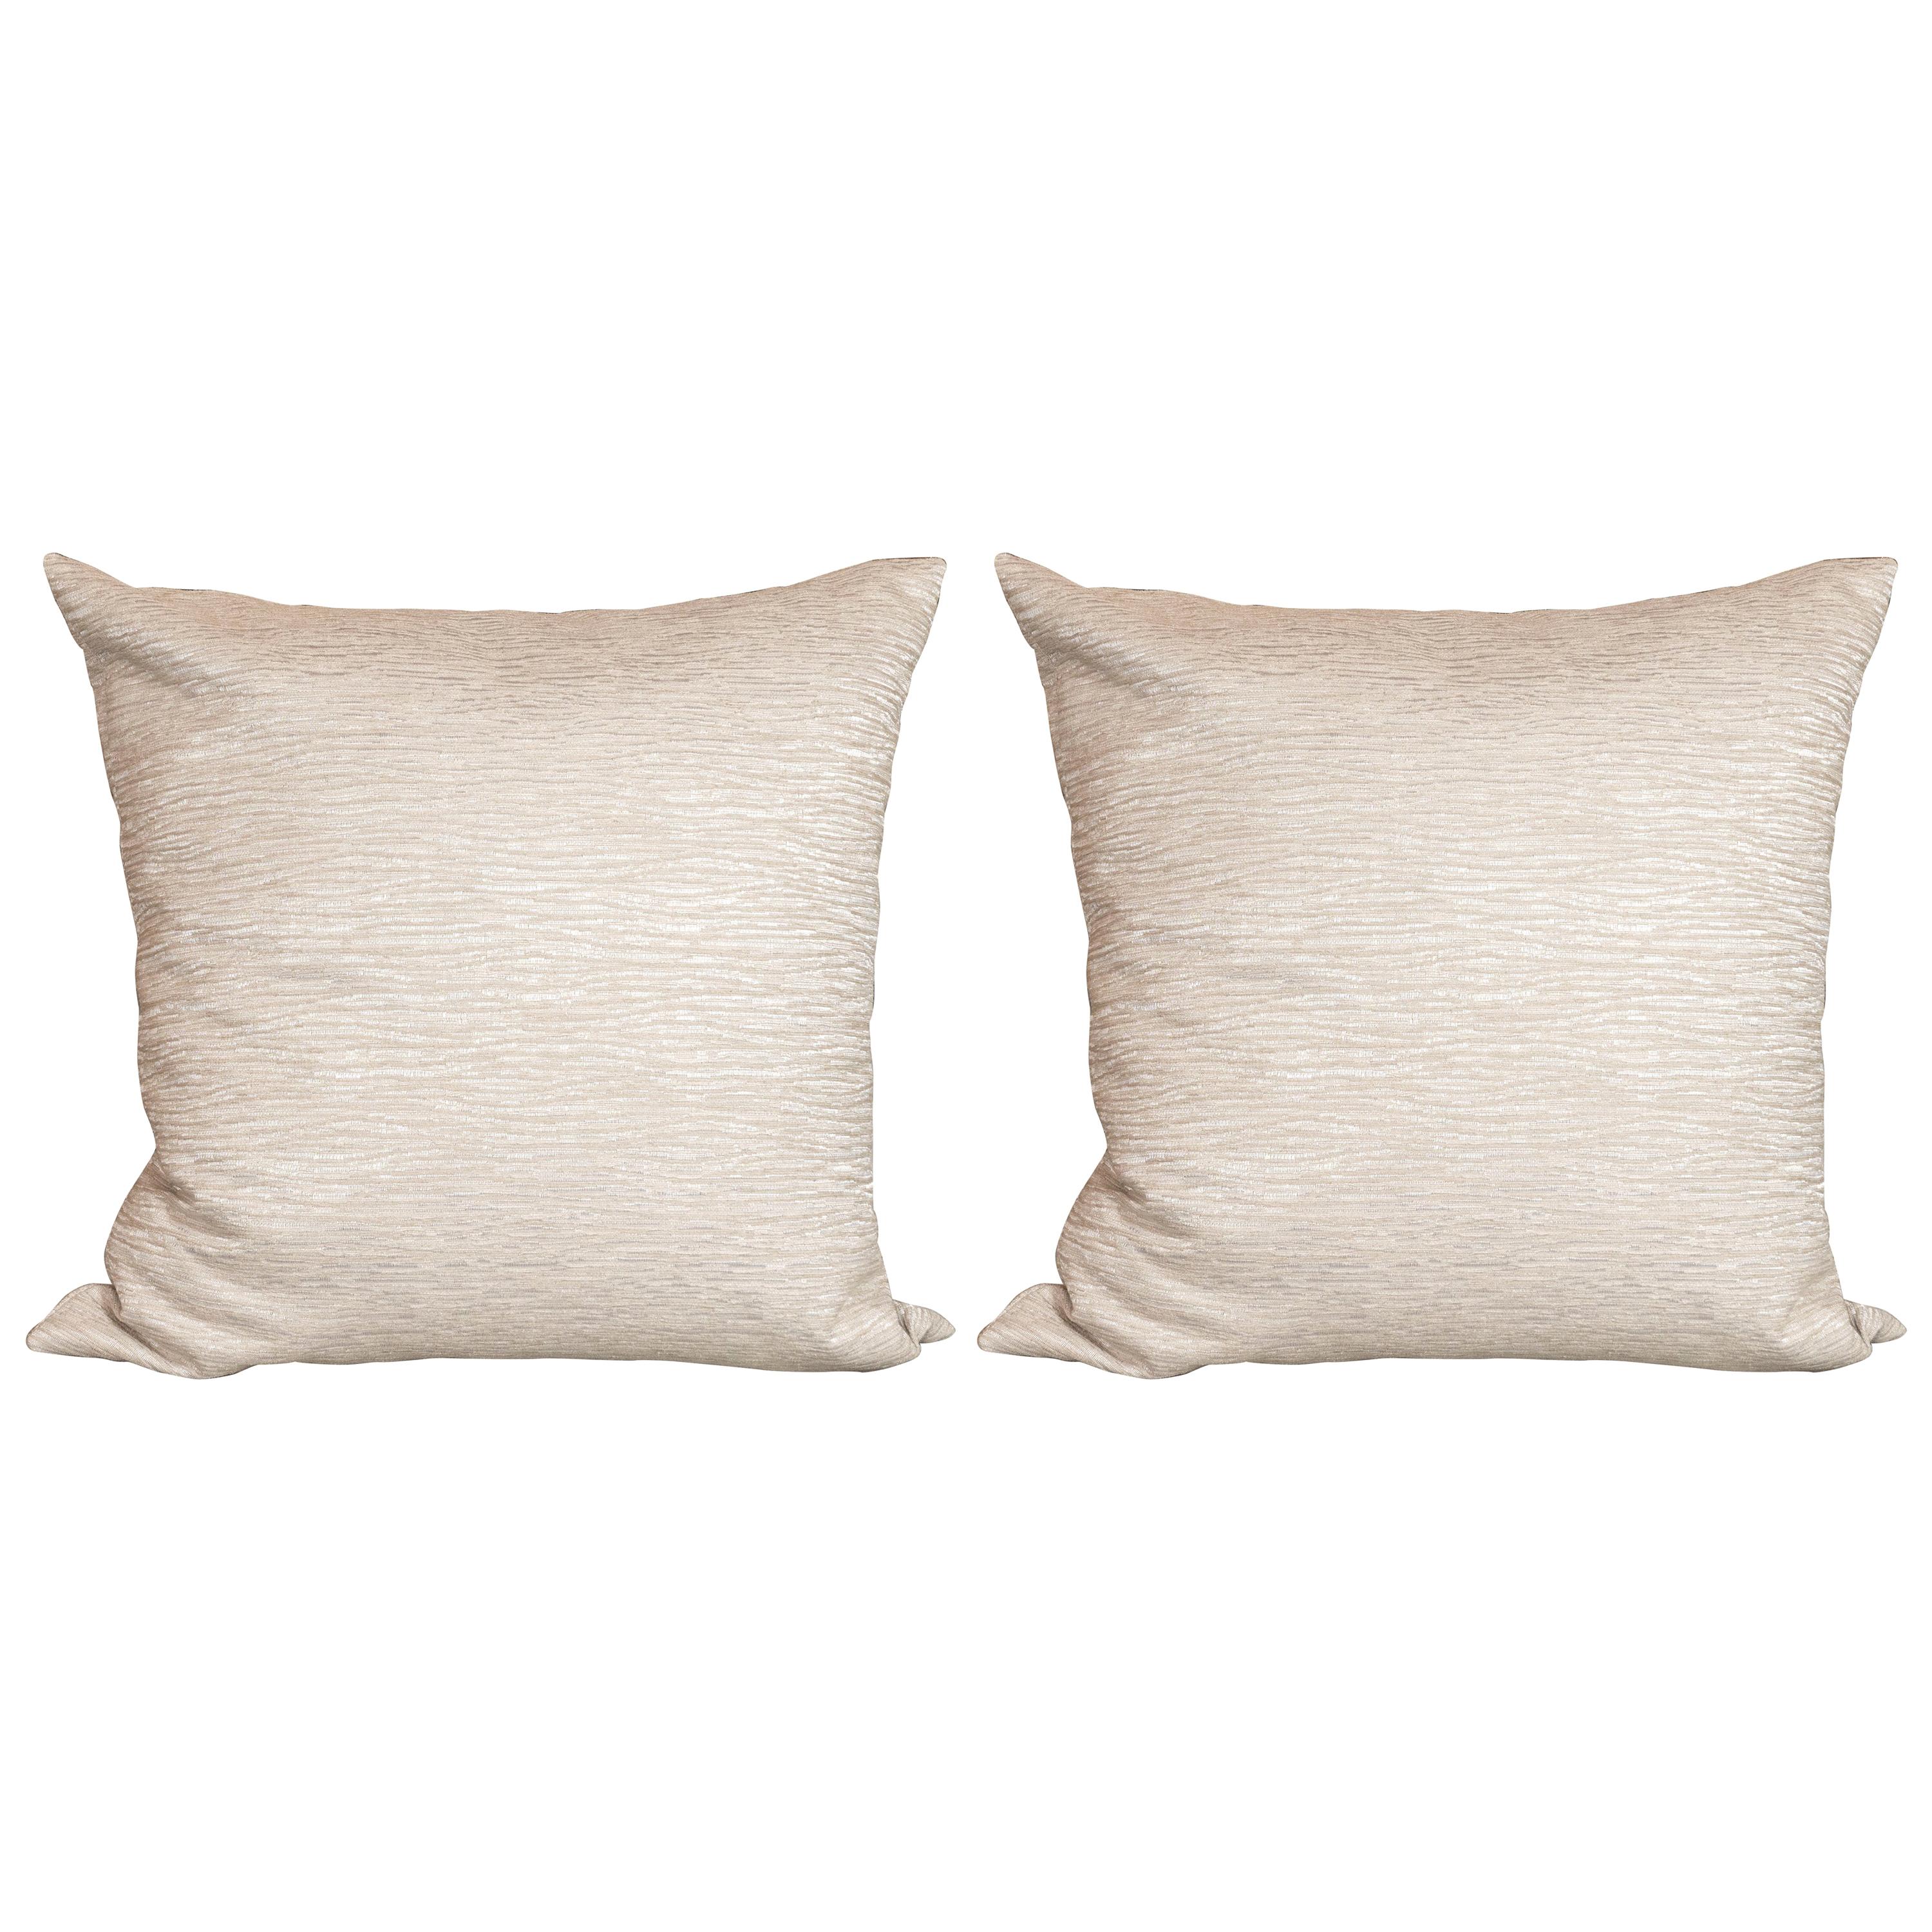 Pair of Modernist Pillows in a White Gold and Ecru Cotton Blend Fabric